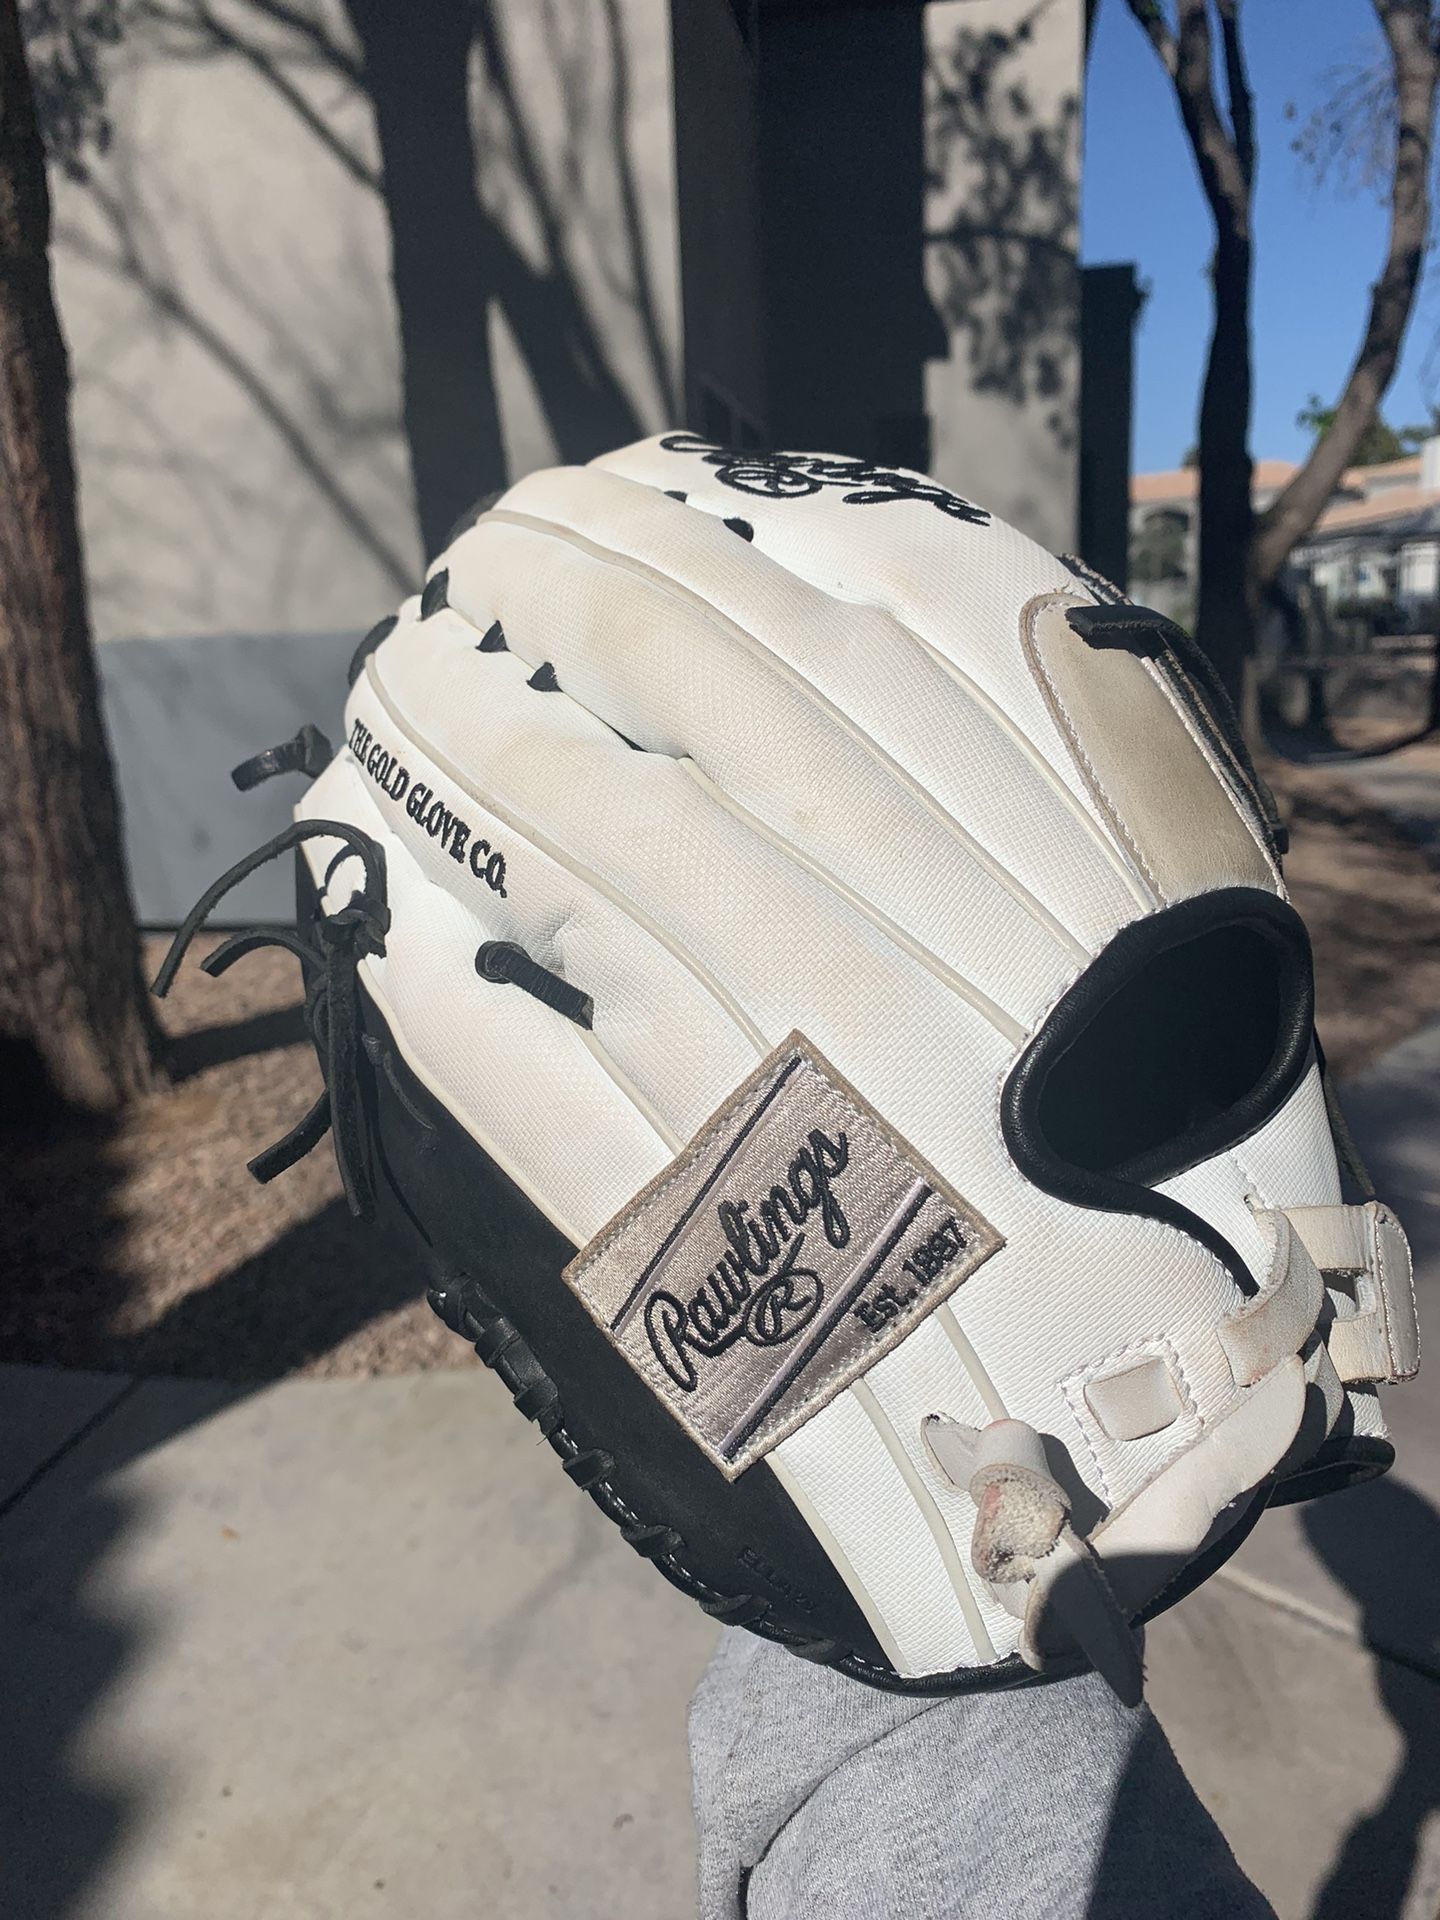 Rawlings “Heart Of The Hide”